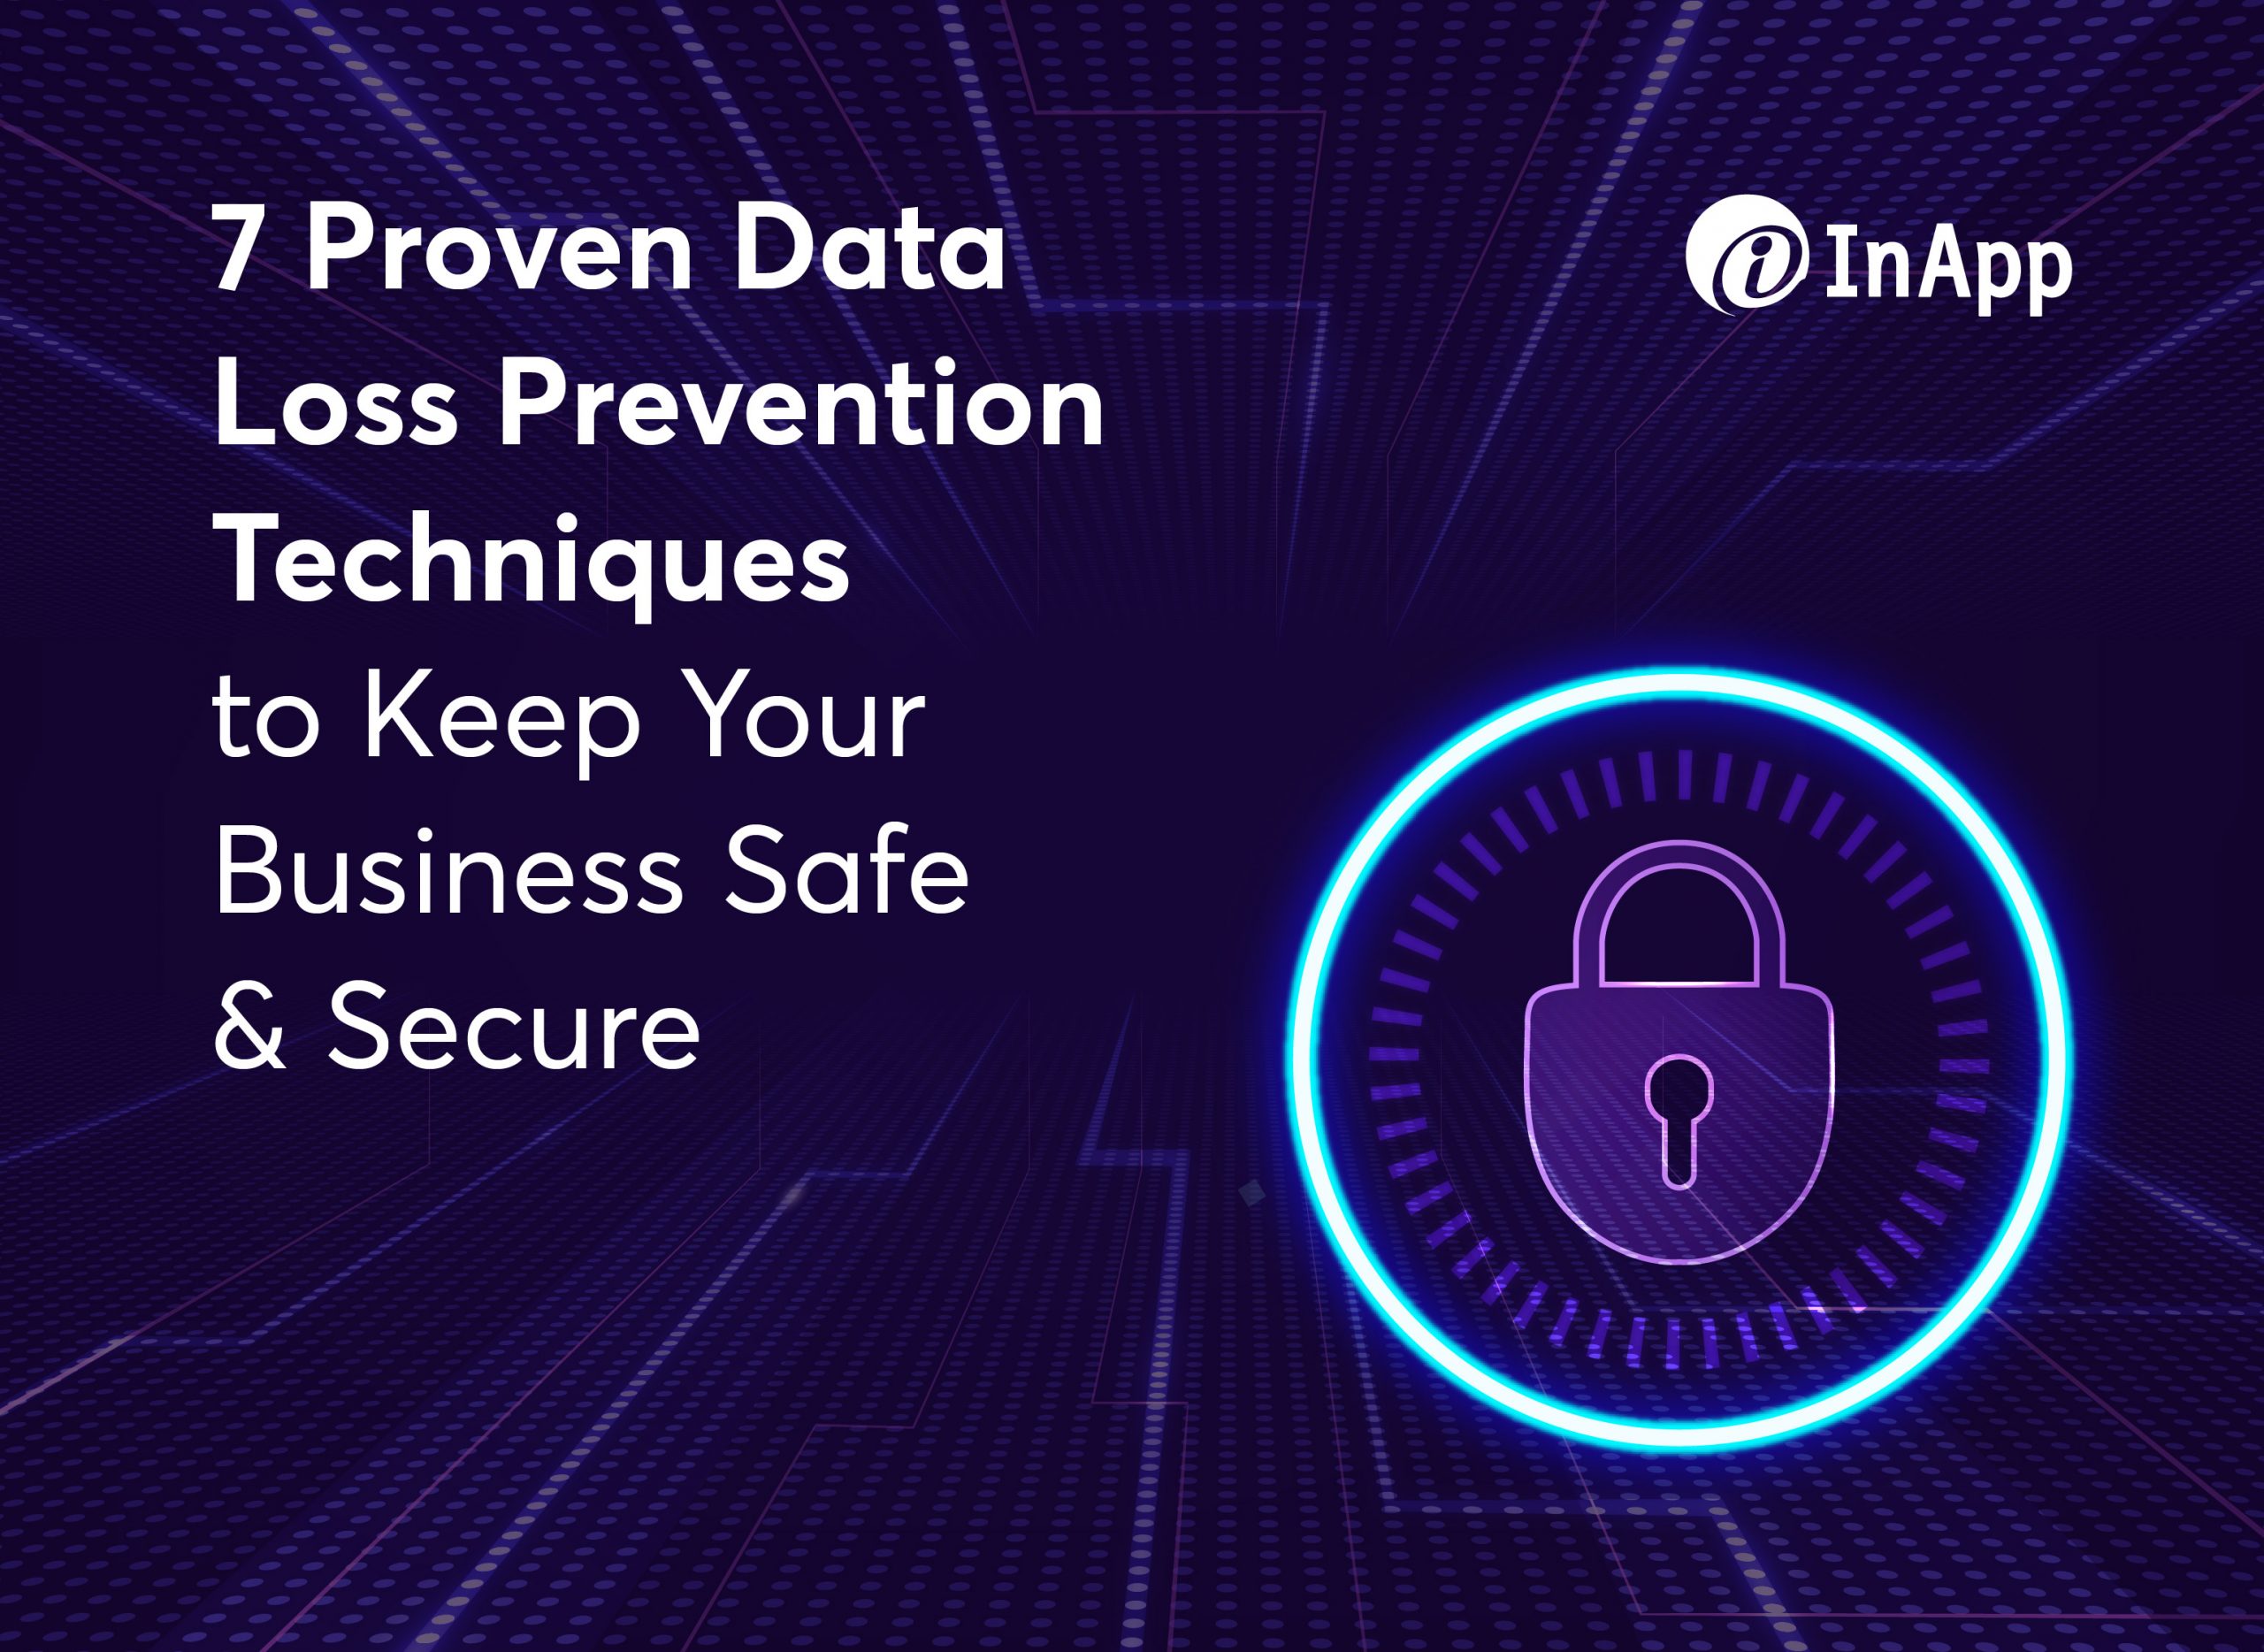 7 Proven Data Loss Prevention Techniques to Keep Your Business Safe & Secure